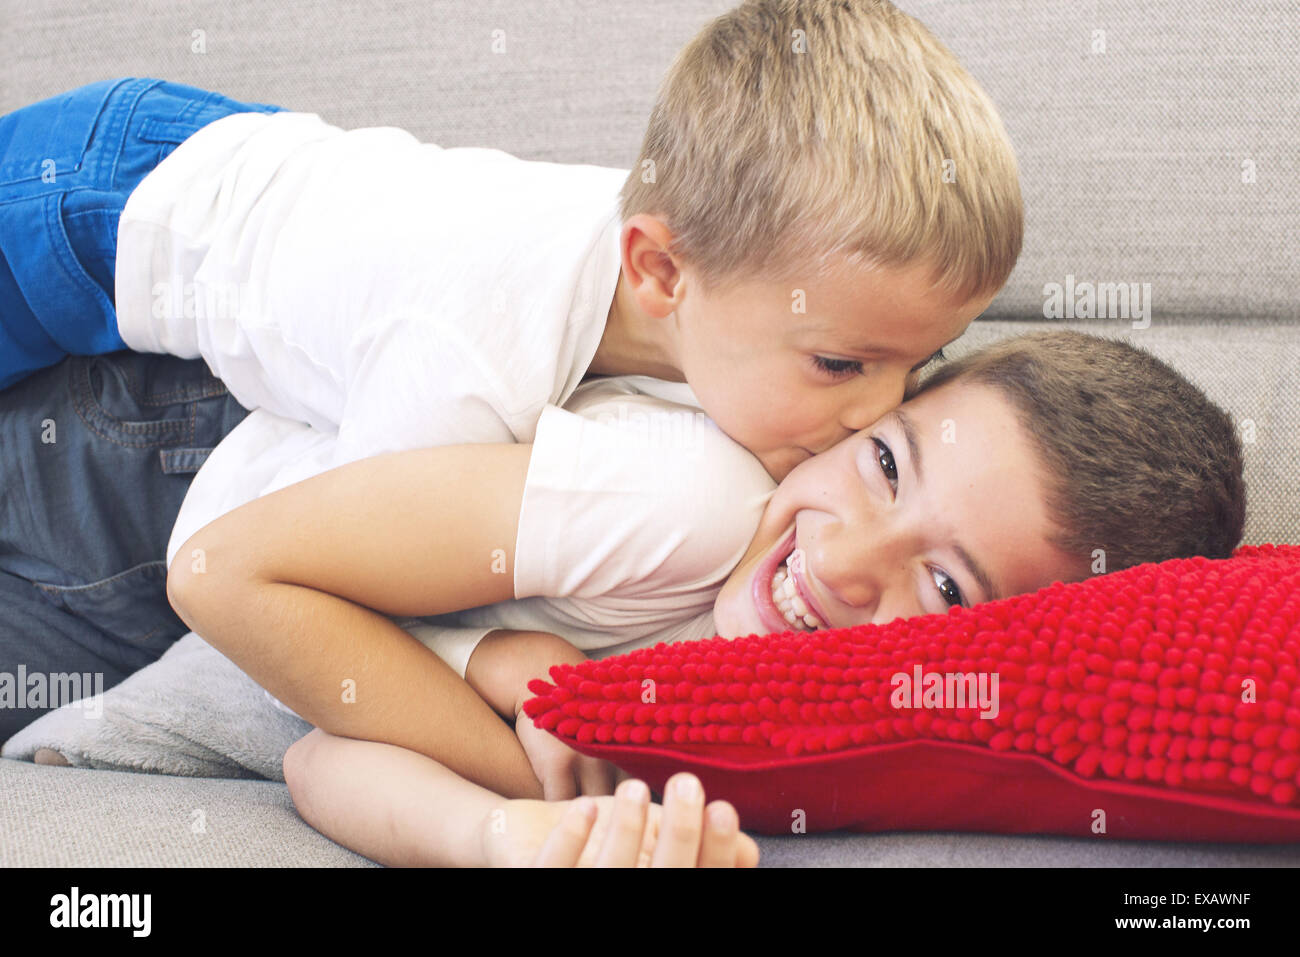 Little boy kissing his older brother's cheek Stock Photo